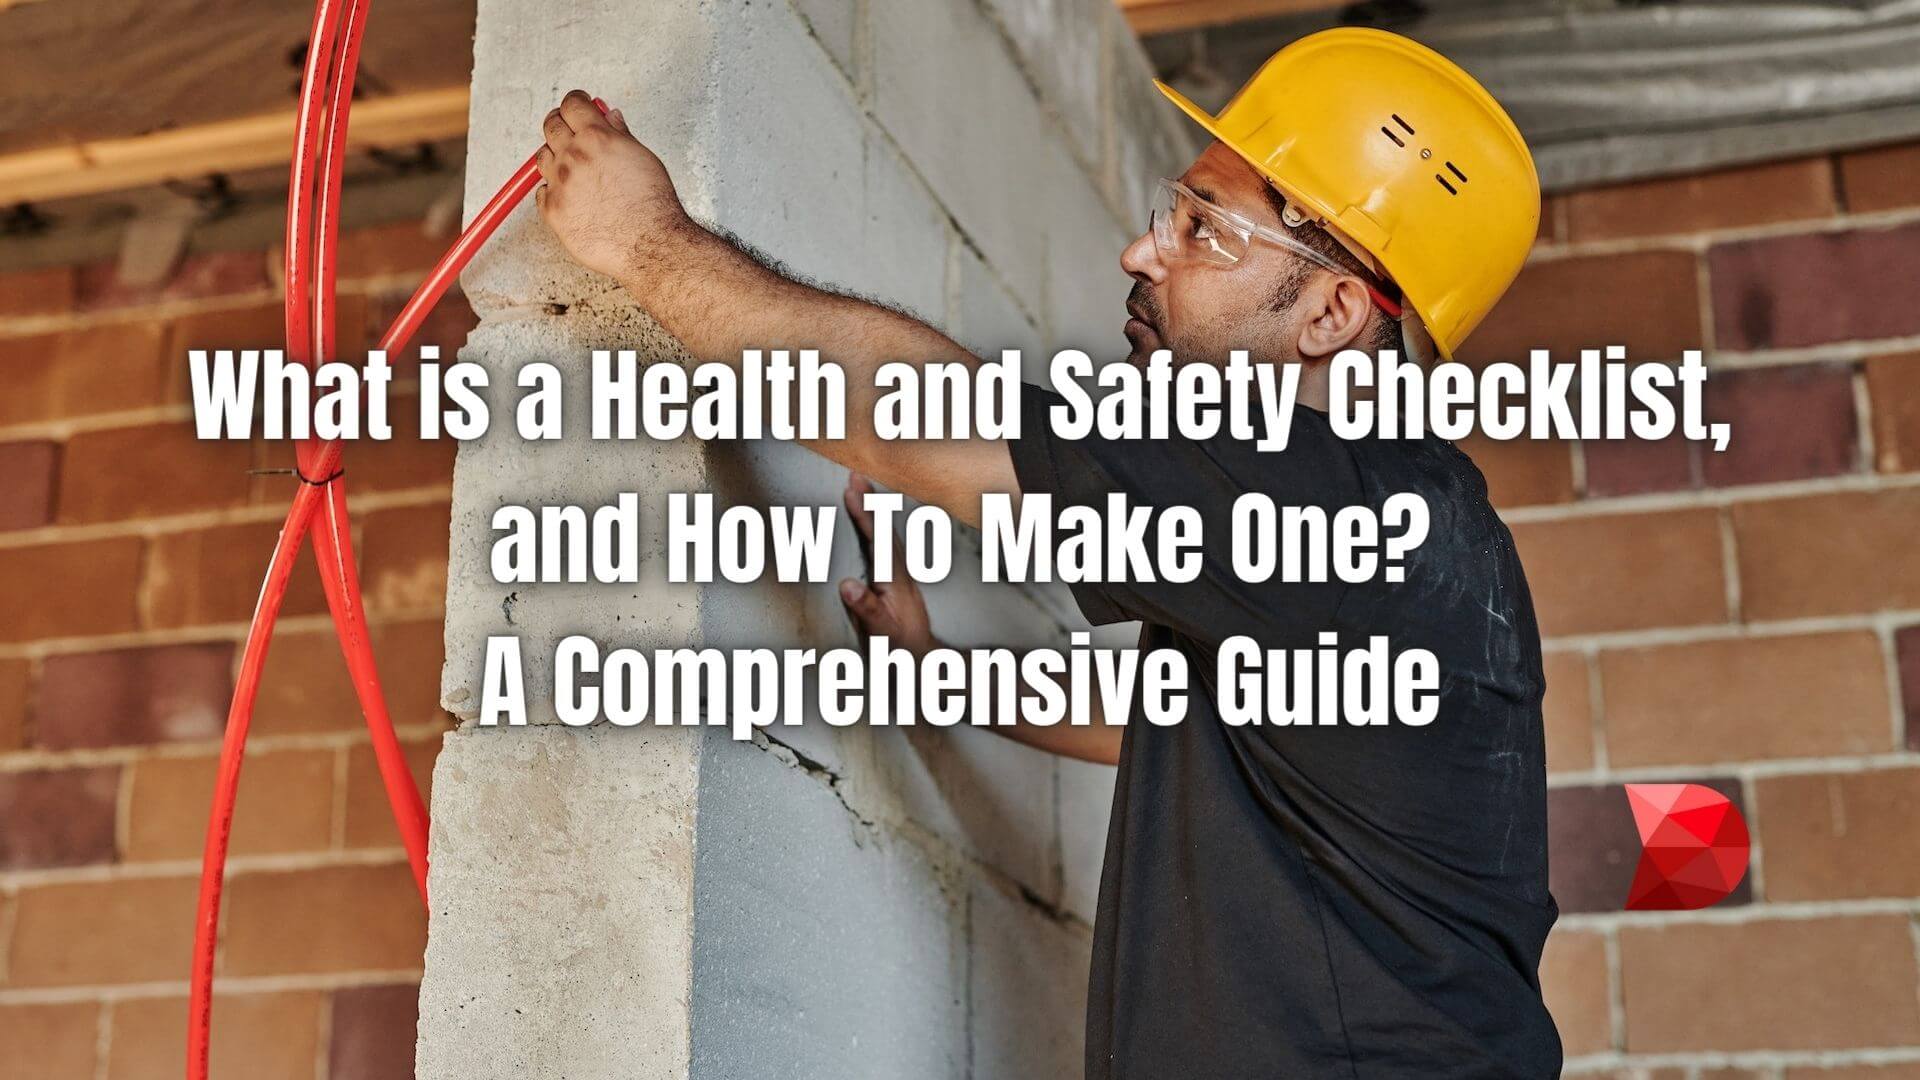 Health and safety checklist is a document designed to help employers identify potential hazards in the workplace. Here's how to make one.